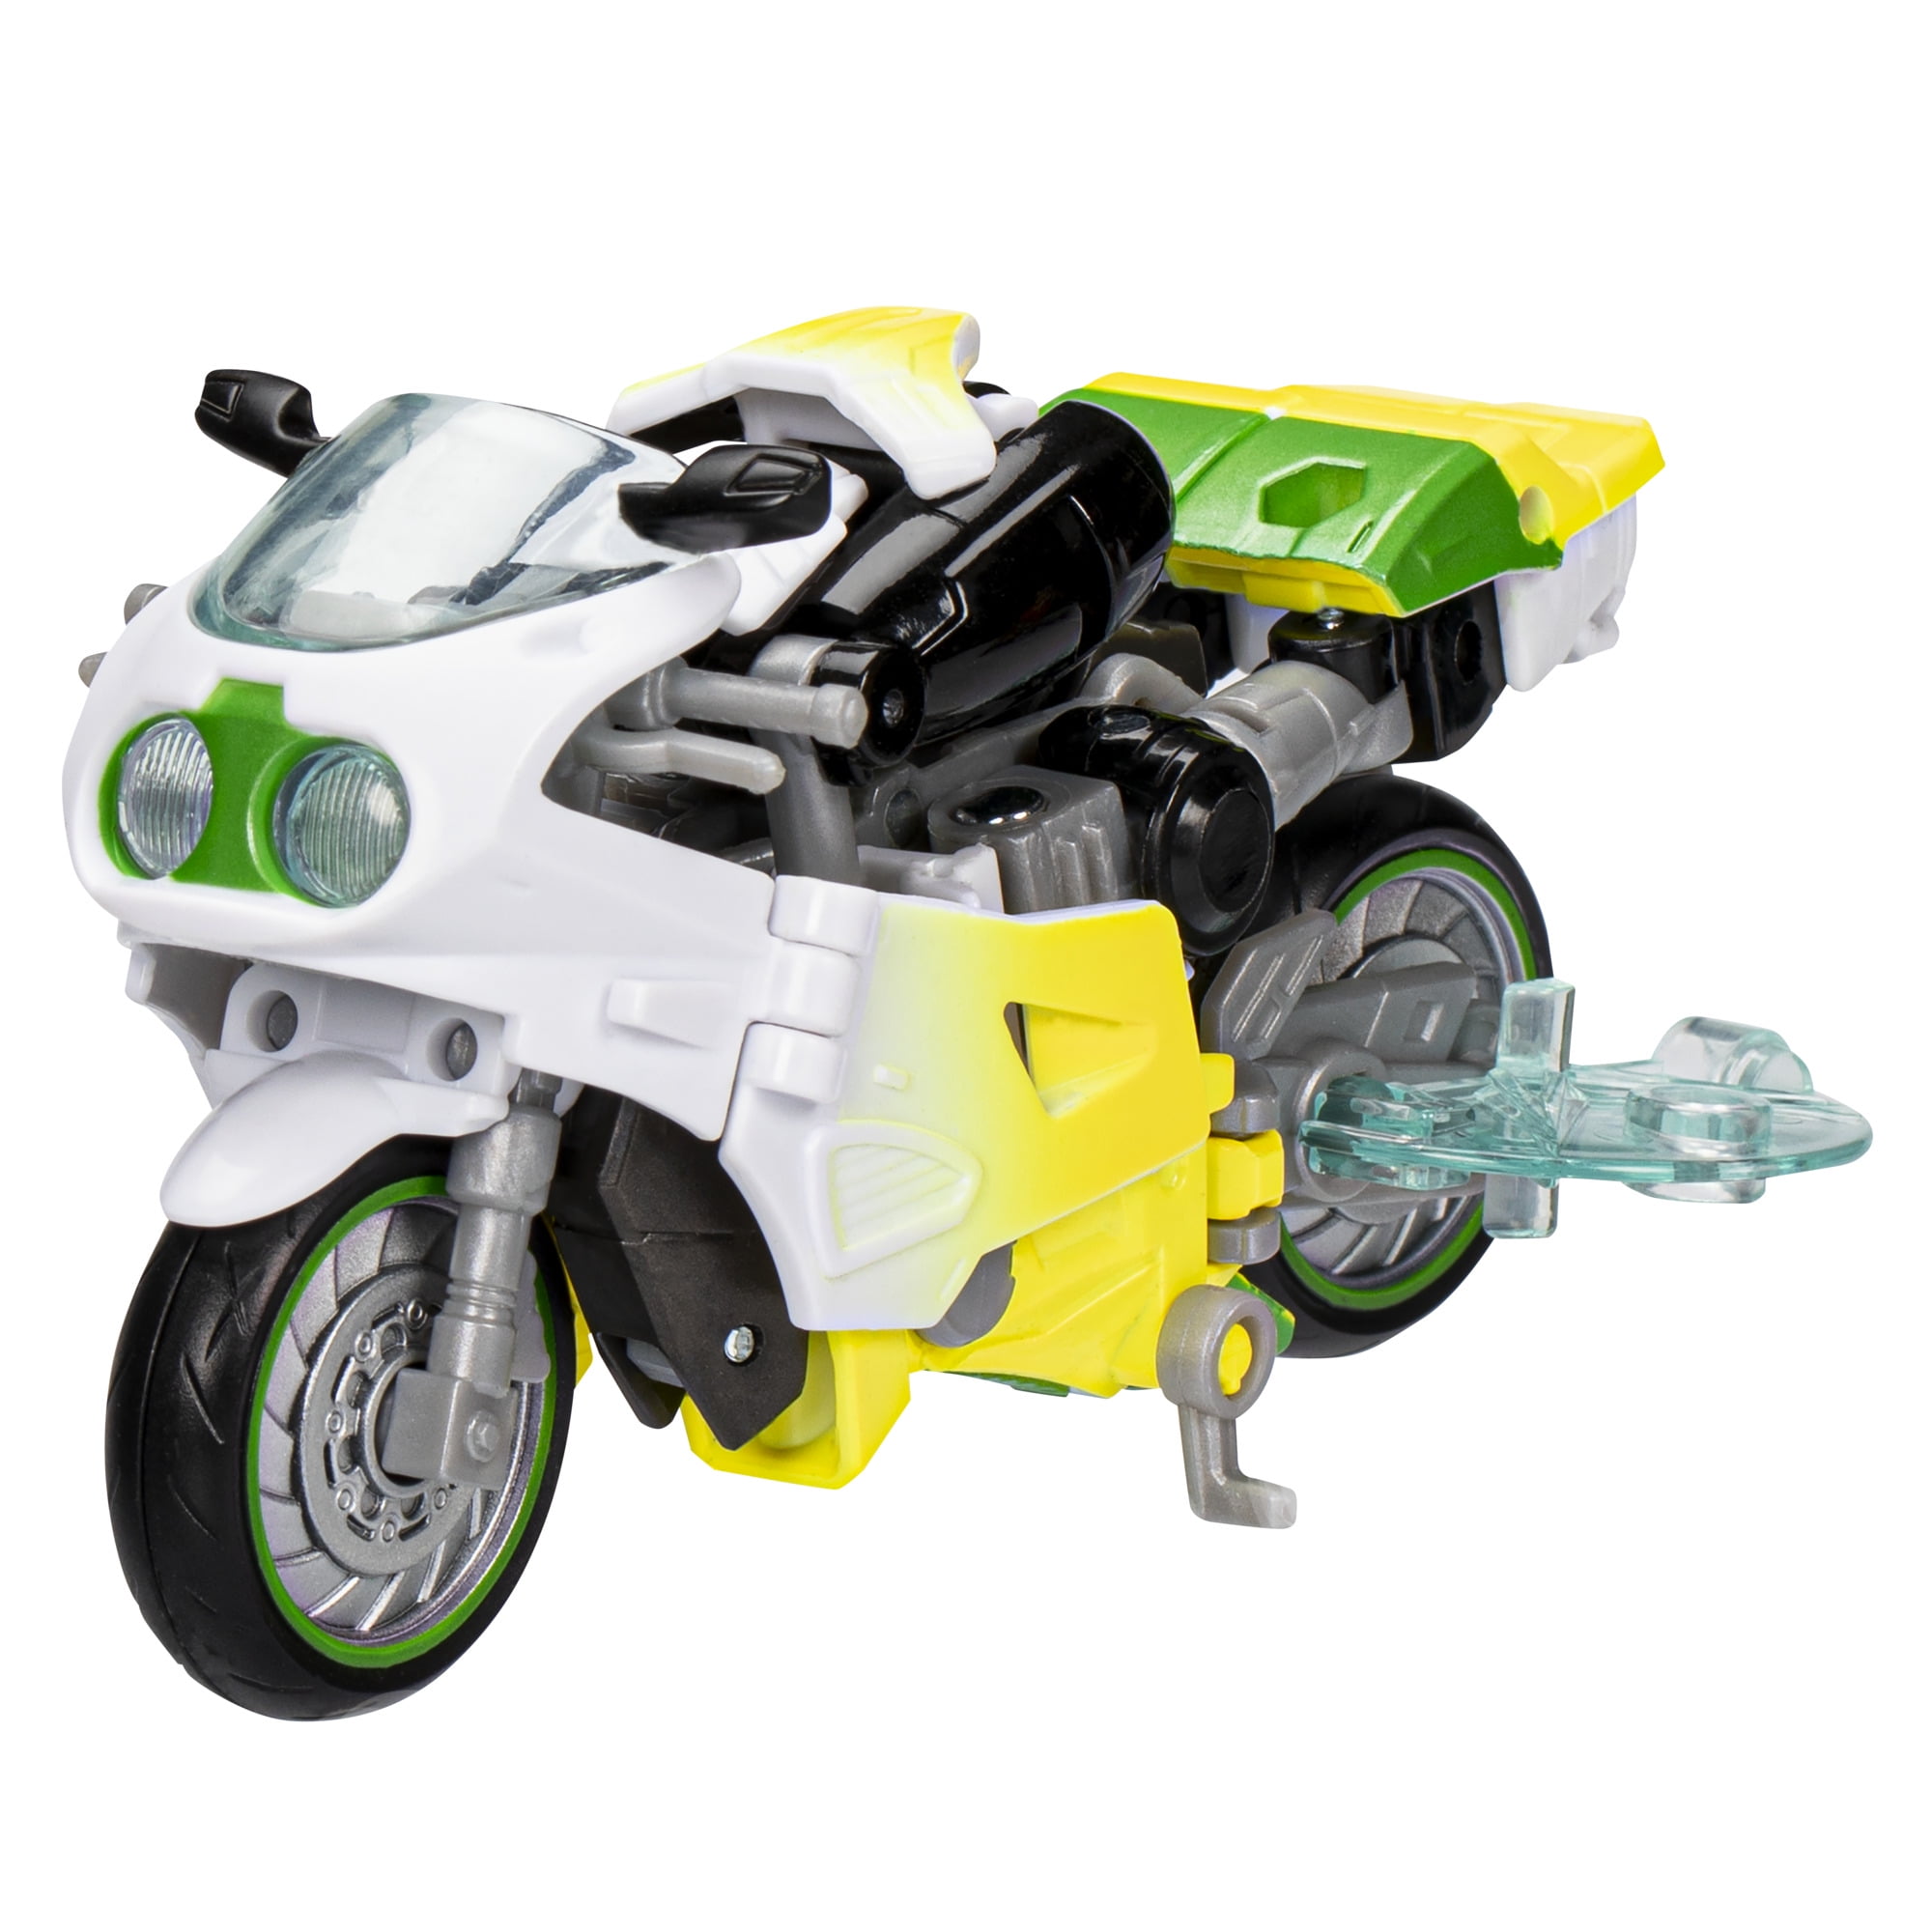 Transformers Gen. Legacy Evolution Deluxe Class G2 Universe Laser Cycle  Actionfigur in 2023